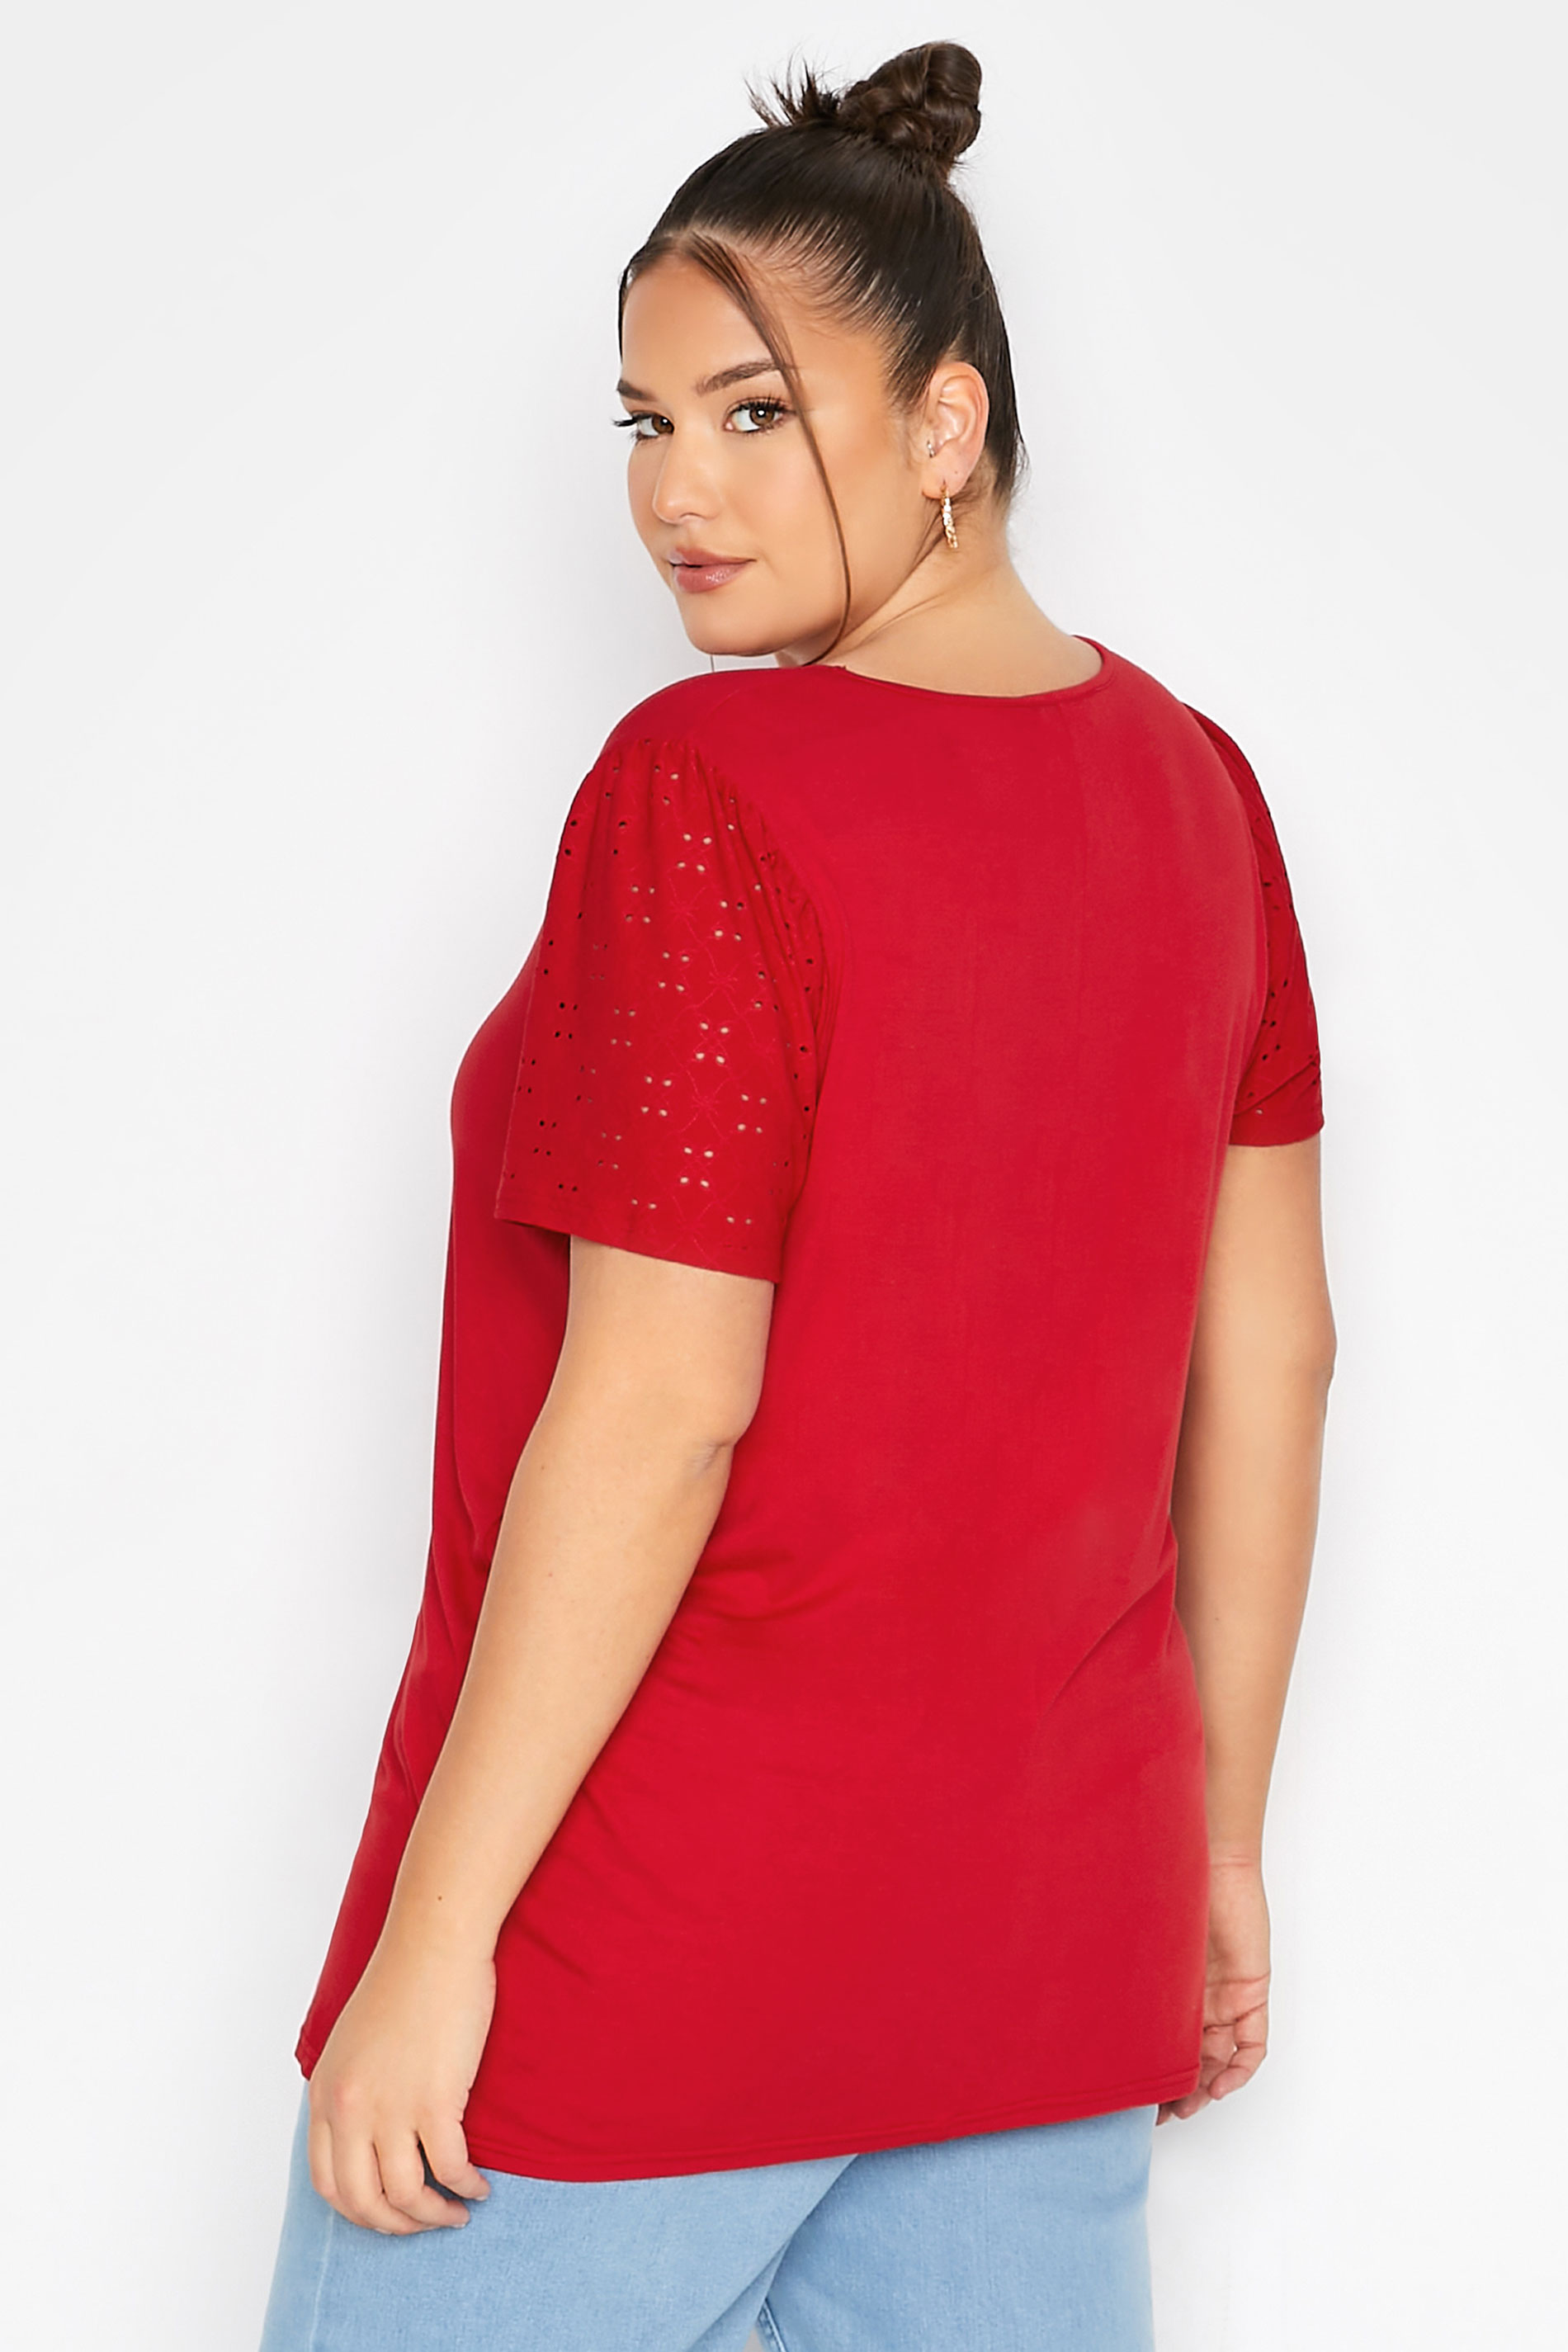 Grande taille  Tops Grande taille  T-Shirts | LIMITED COLLECTION - T-Shirt Rouge Manches Broderie Anglaise - ZF46306